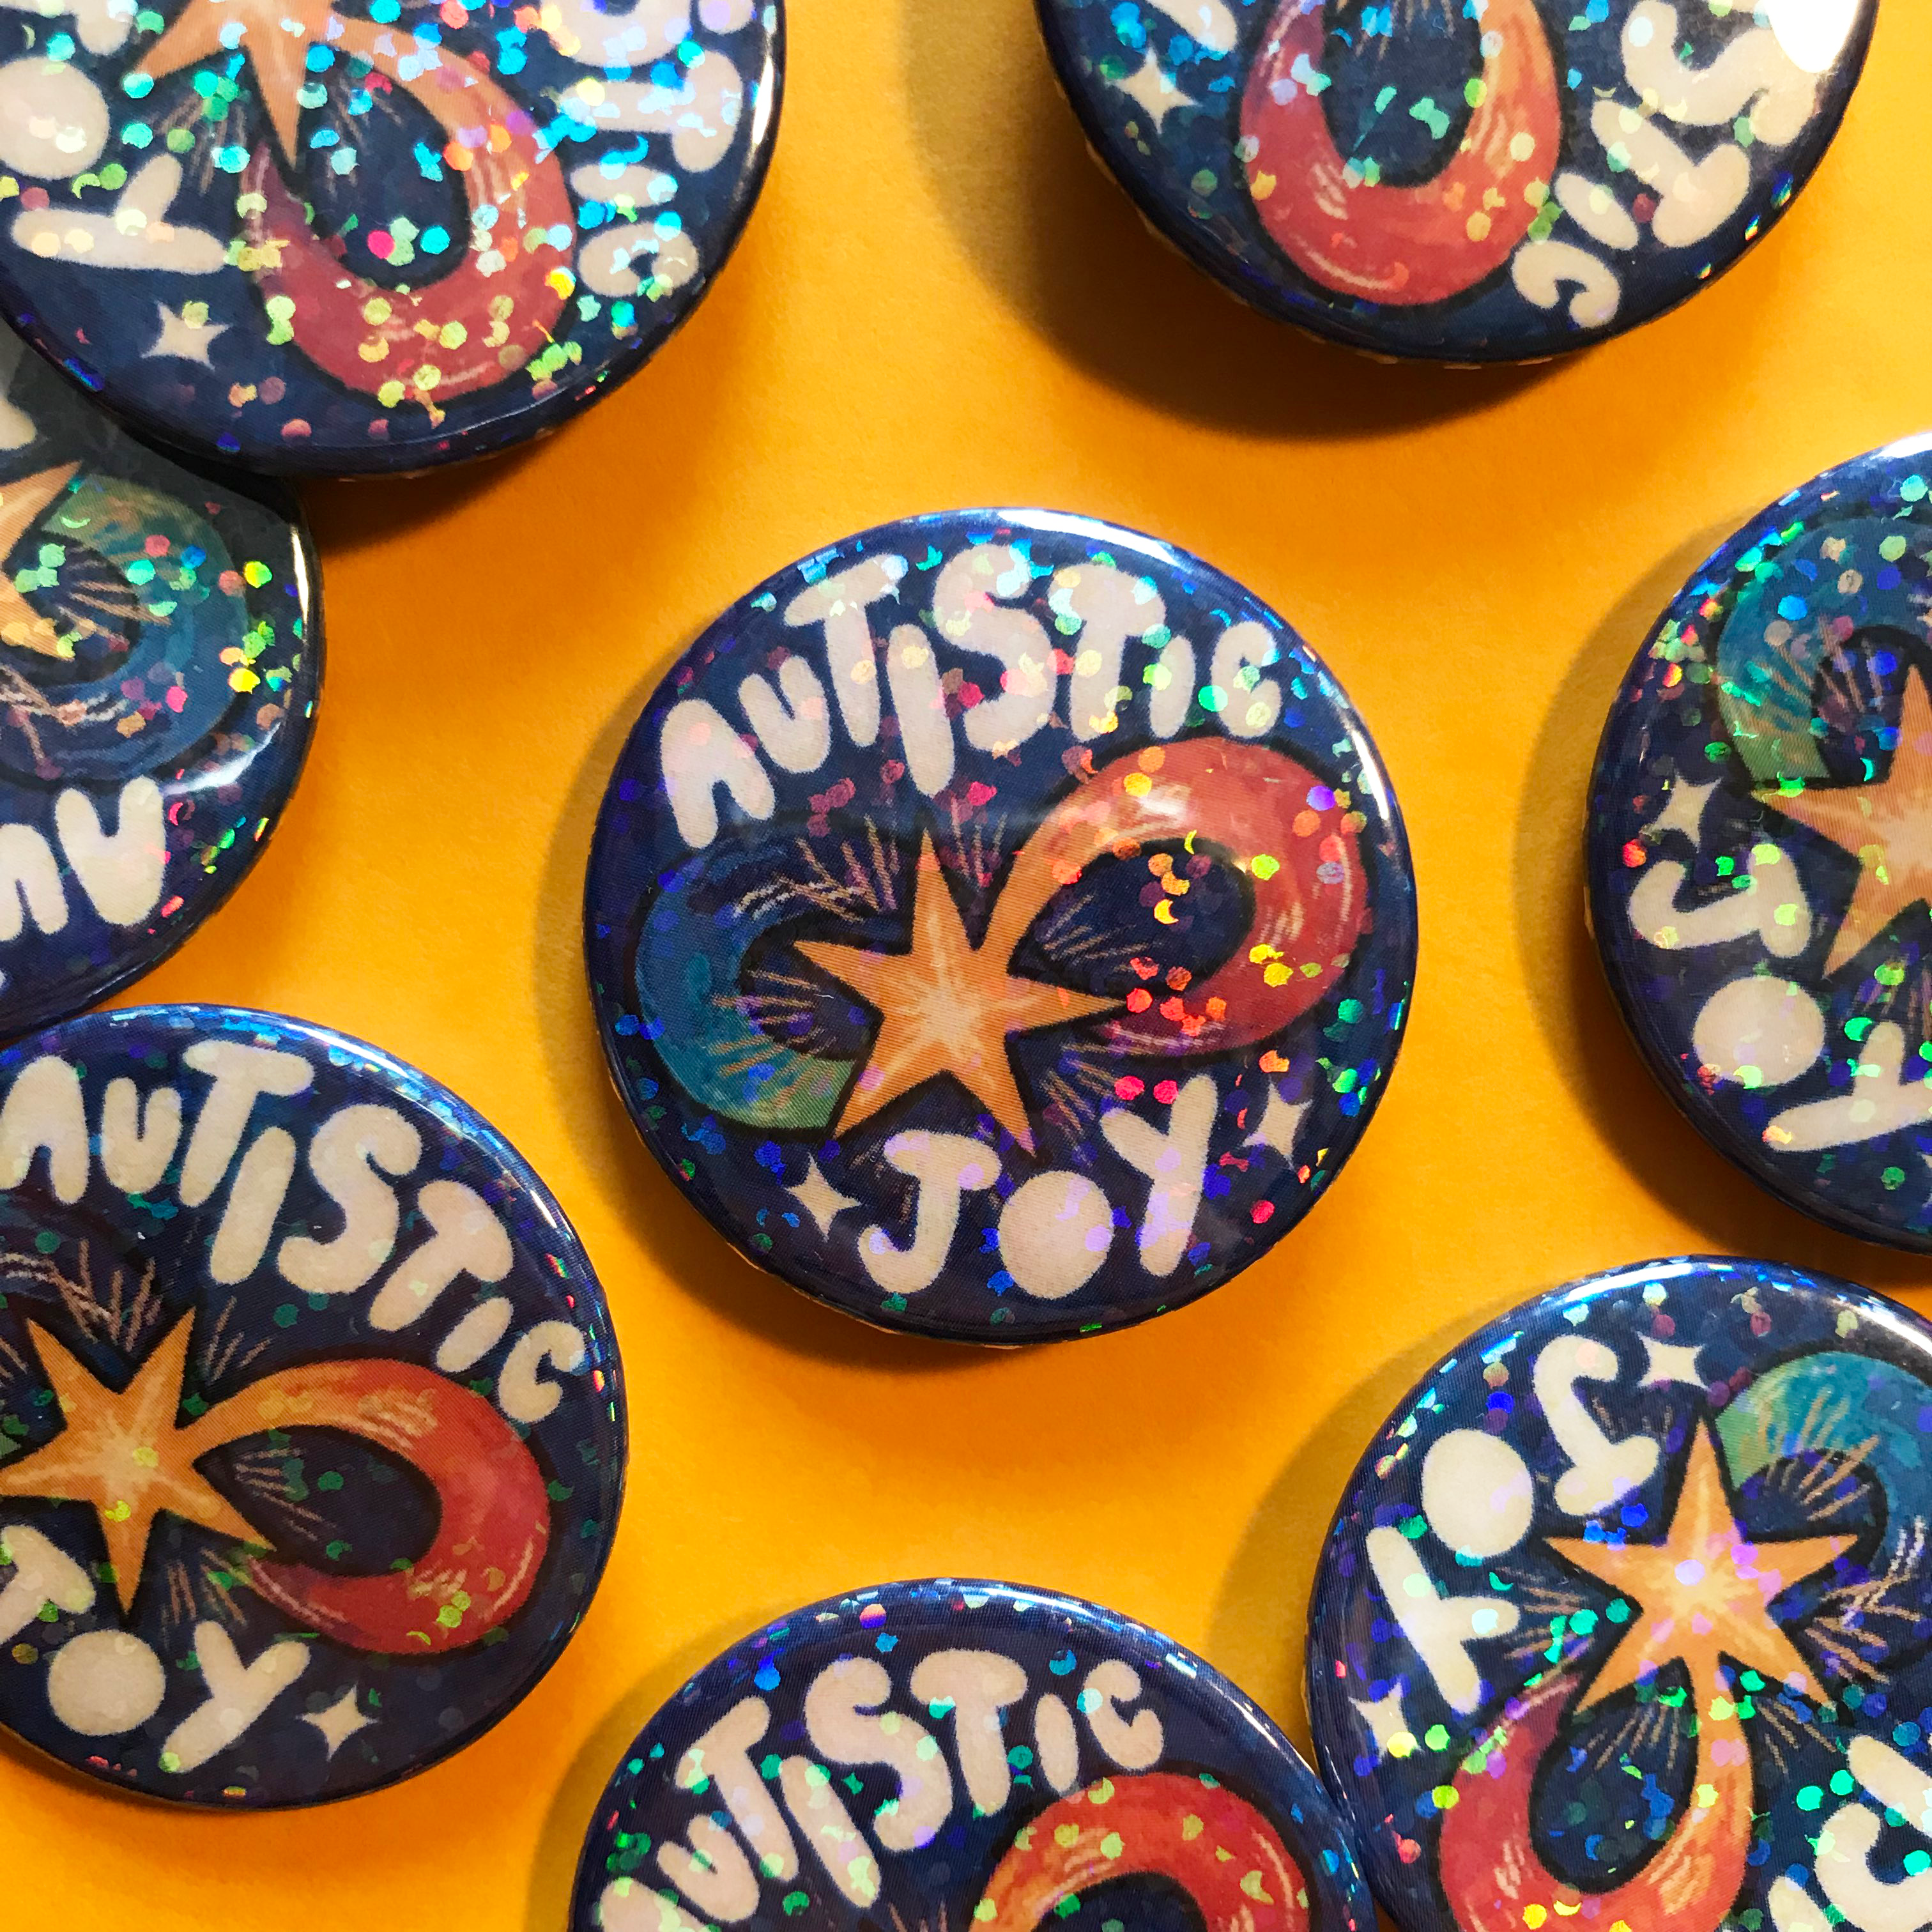 A photo of holographic badges against a yellow background. The badges have a design of a rainbow covered infinity sign shaped shooting star against a dark blue background, with text that says 'autistic joy'